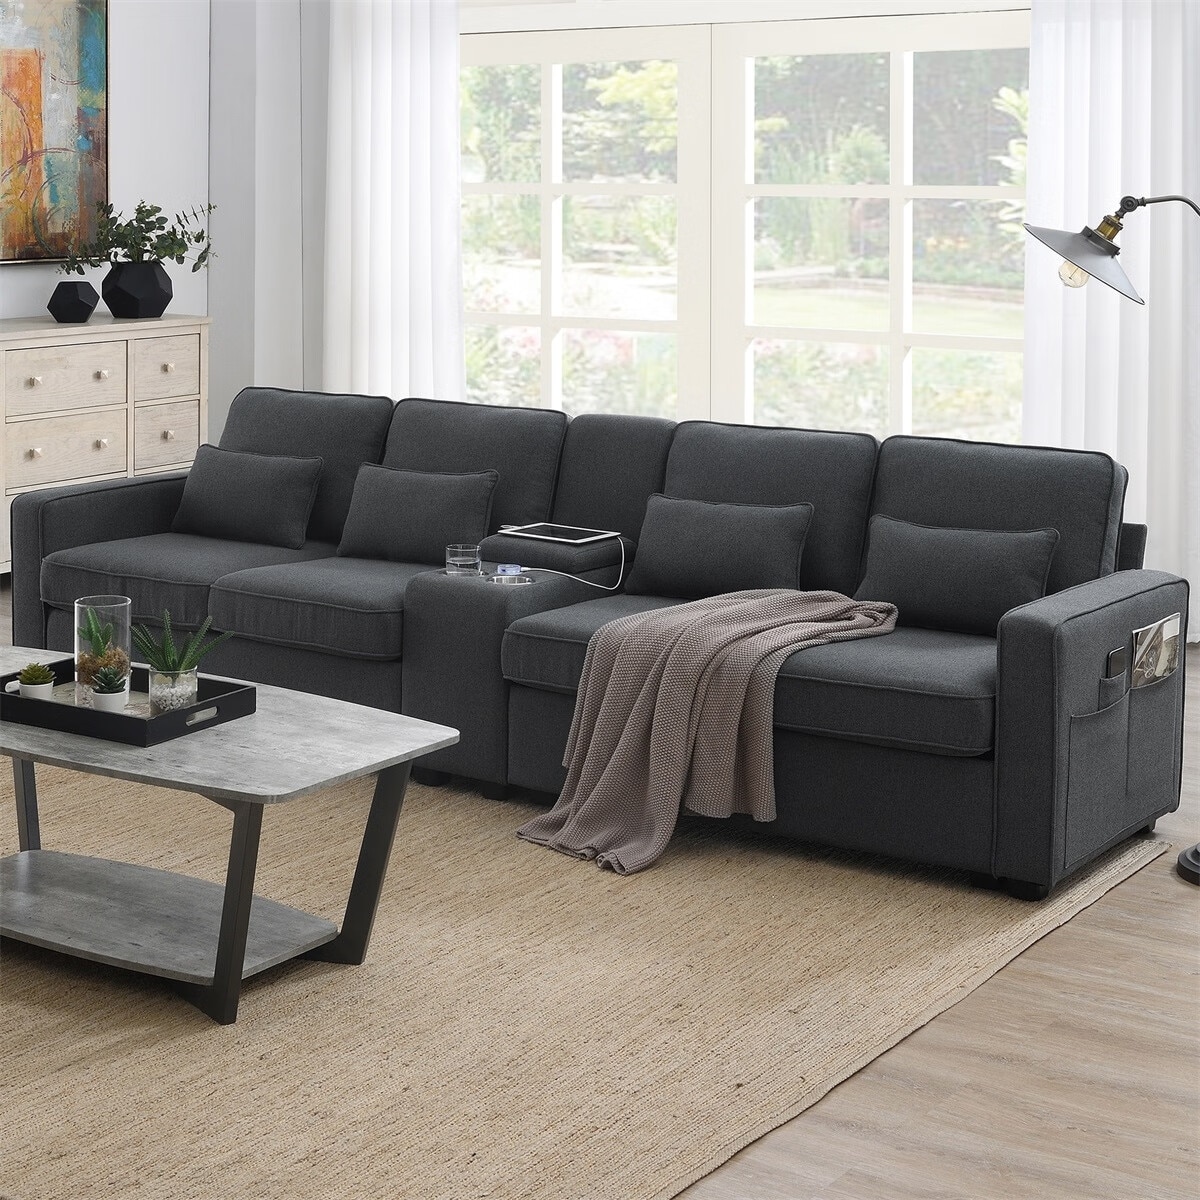 Couch tray with cup holder - Couch console cup holder - Couch